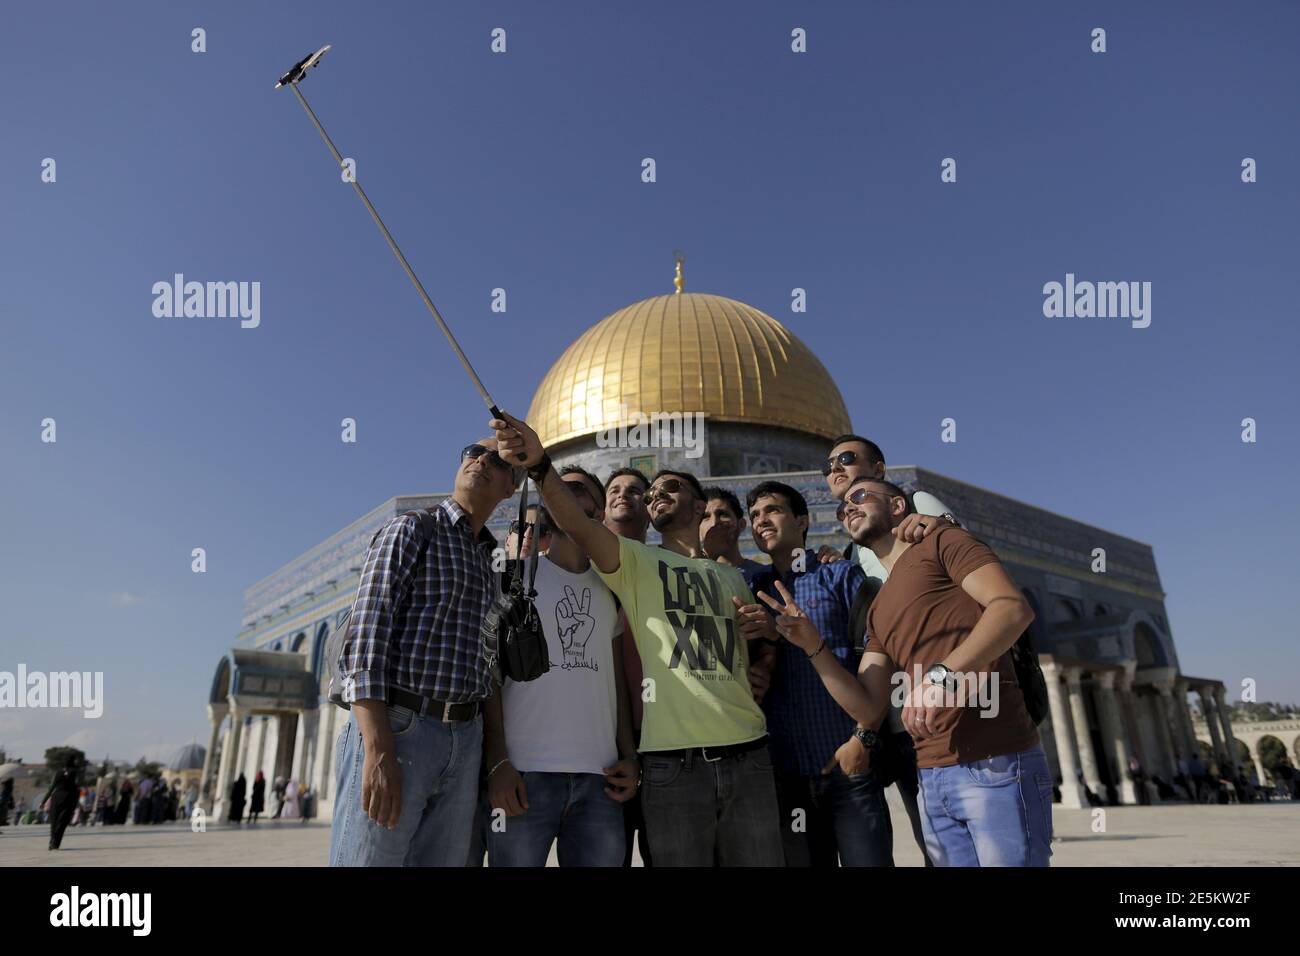 Palestinian Hakem Shtayeh (C), 28, from the West Bank city of Nablus, takes a selfie photo with friends in front of the Dome of the Rock on the compound known to Muslims as Noble Sanctuary and to Jews as Temple Mount, in Jerusalem's Old City, during the holy month of Ramadan, June 29, 2015. This is Shtayeh's first visit to the compound. Palestinians young and old have jumped on a trend for taking 'selfies' at Al Aqsa, the 8th century Muslim shrine in Jerusalem, both as a personal memento and for relatives prevented from or unable to visit the ancient compound. REUTERS/Ammar Awad   PICTURE 7 OF Stock Photo